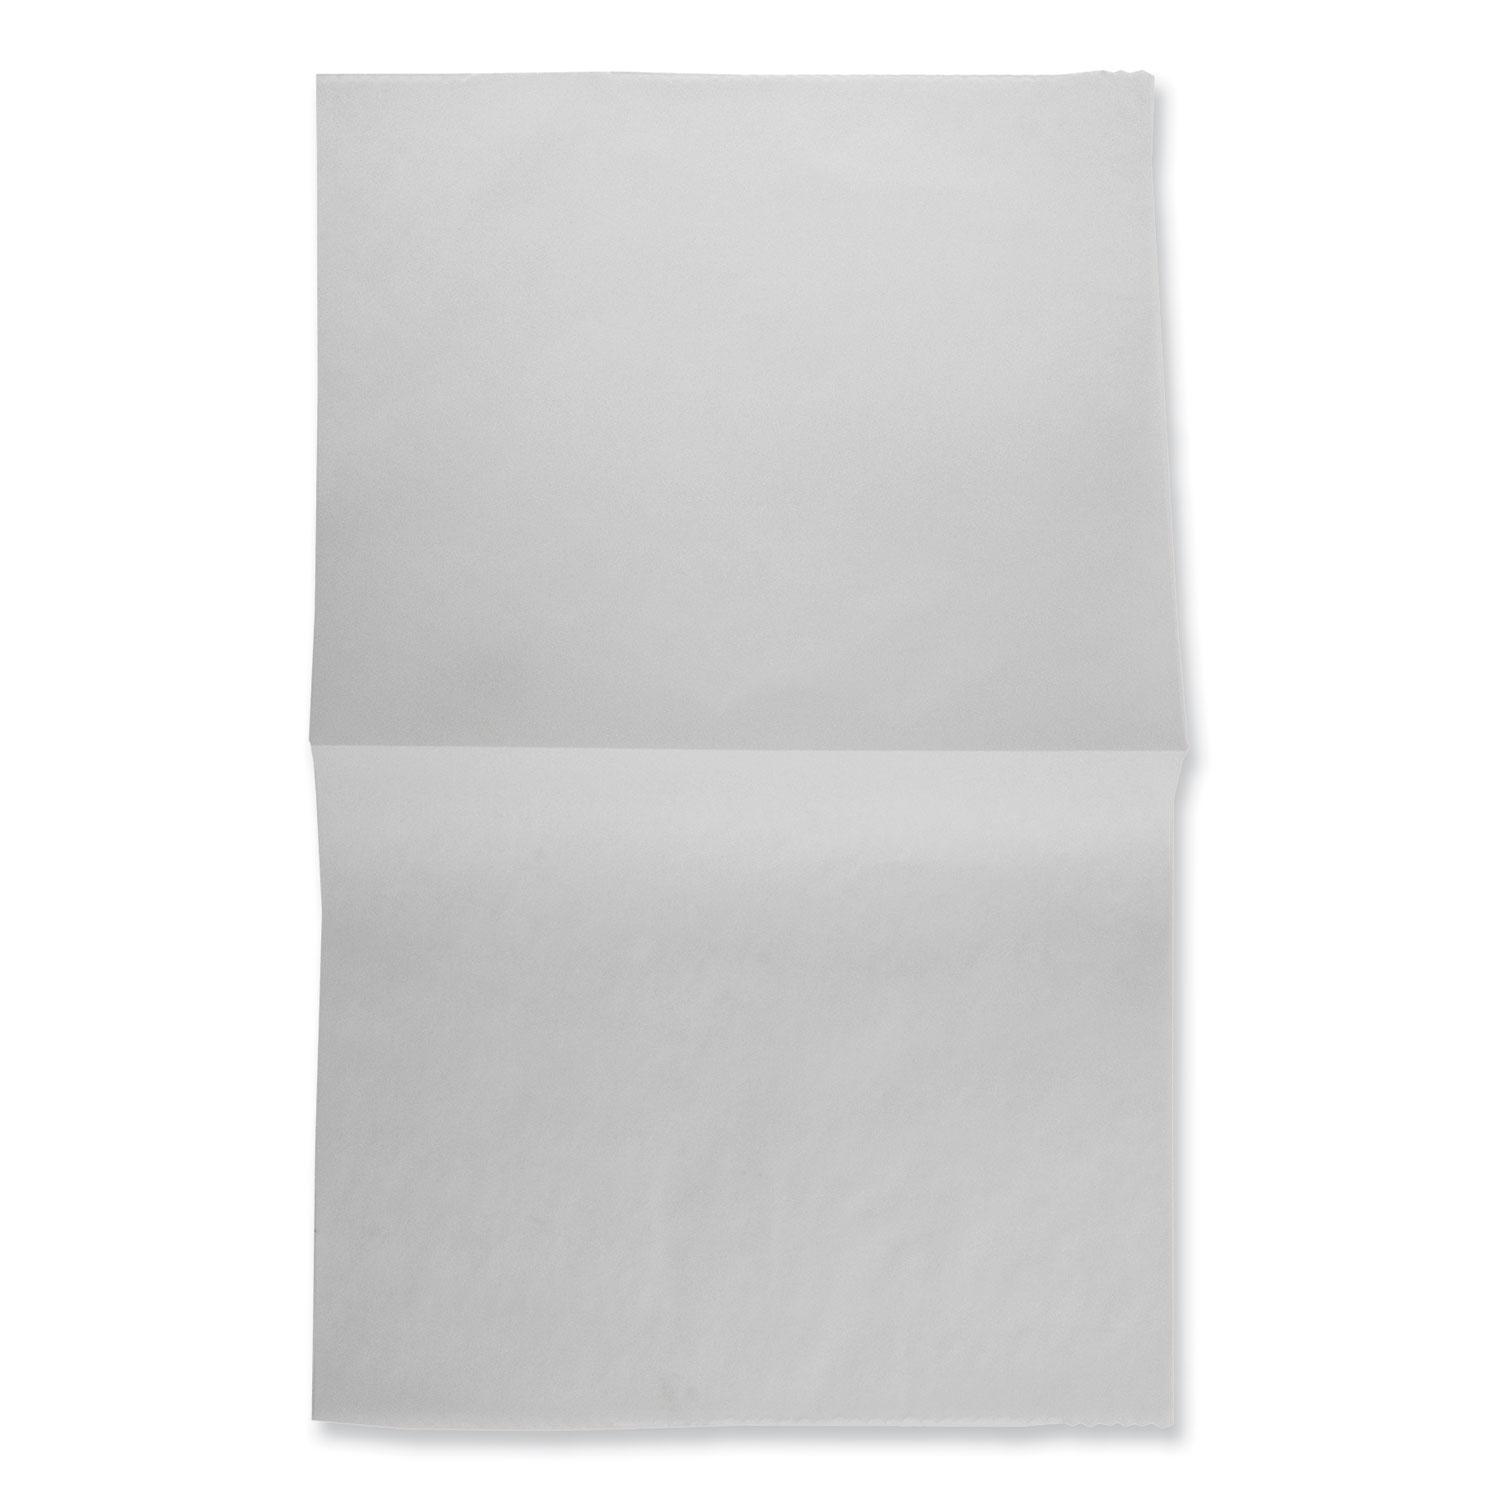 Interfolded Deli Sheets, 10.75 x 10, Standard Weight, 500 Sheets/Box, 12  Boxes/Carton